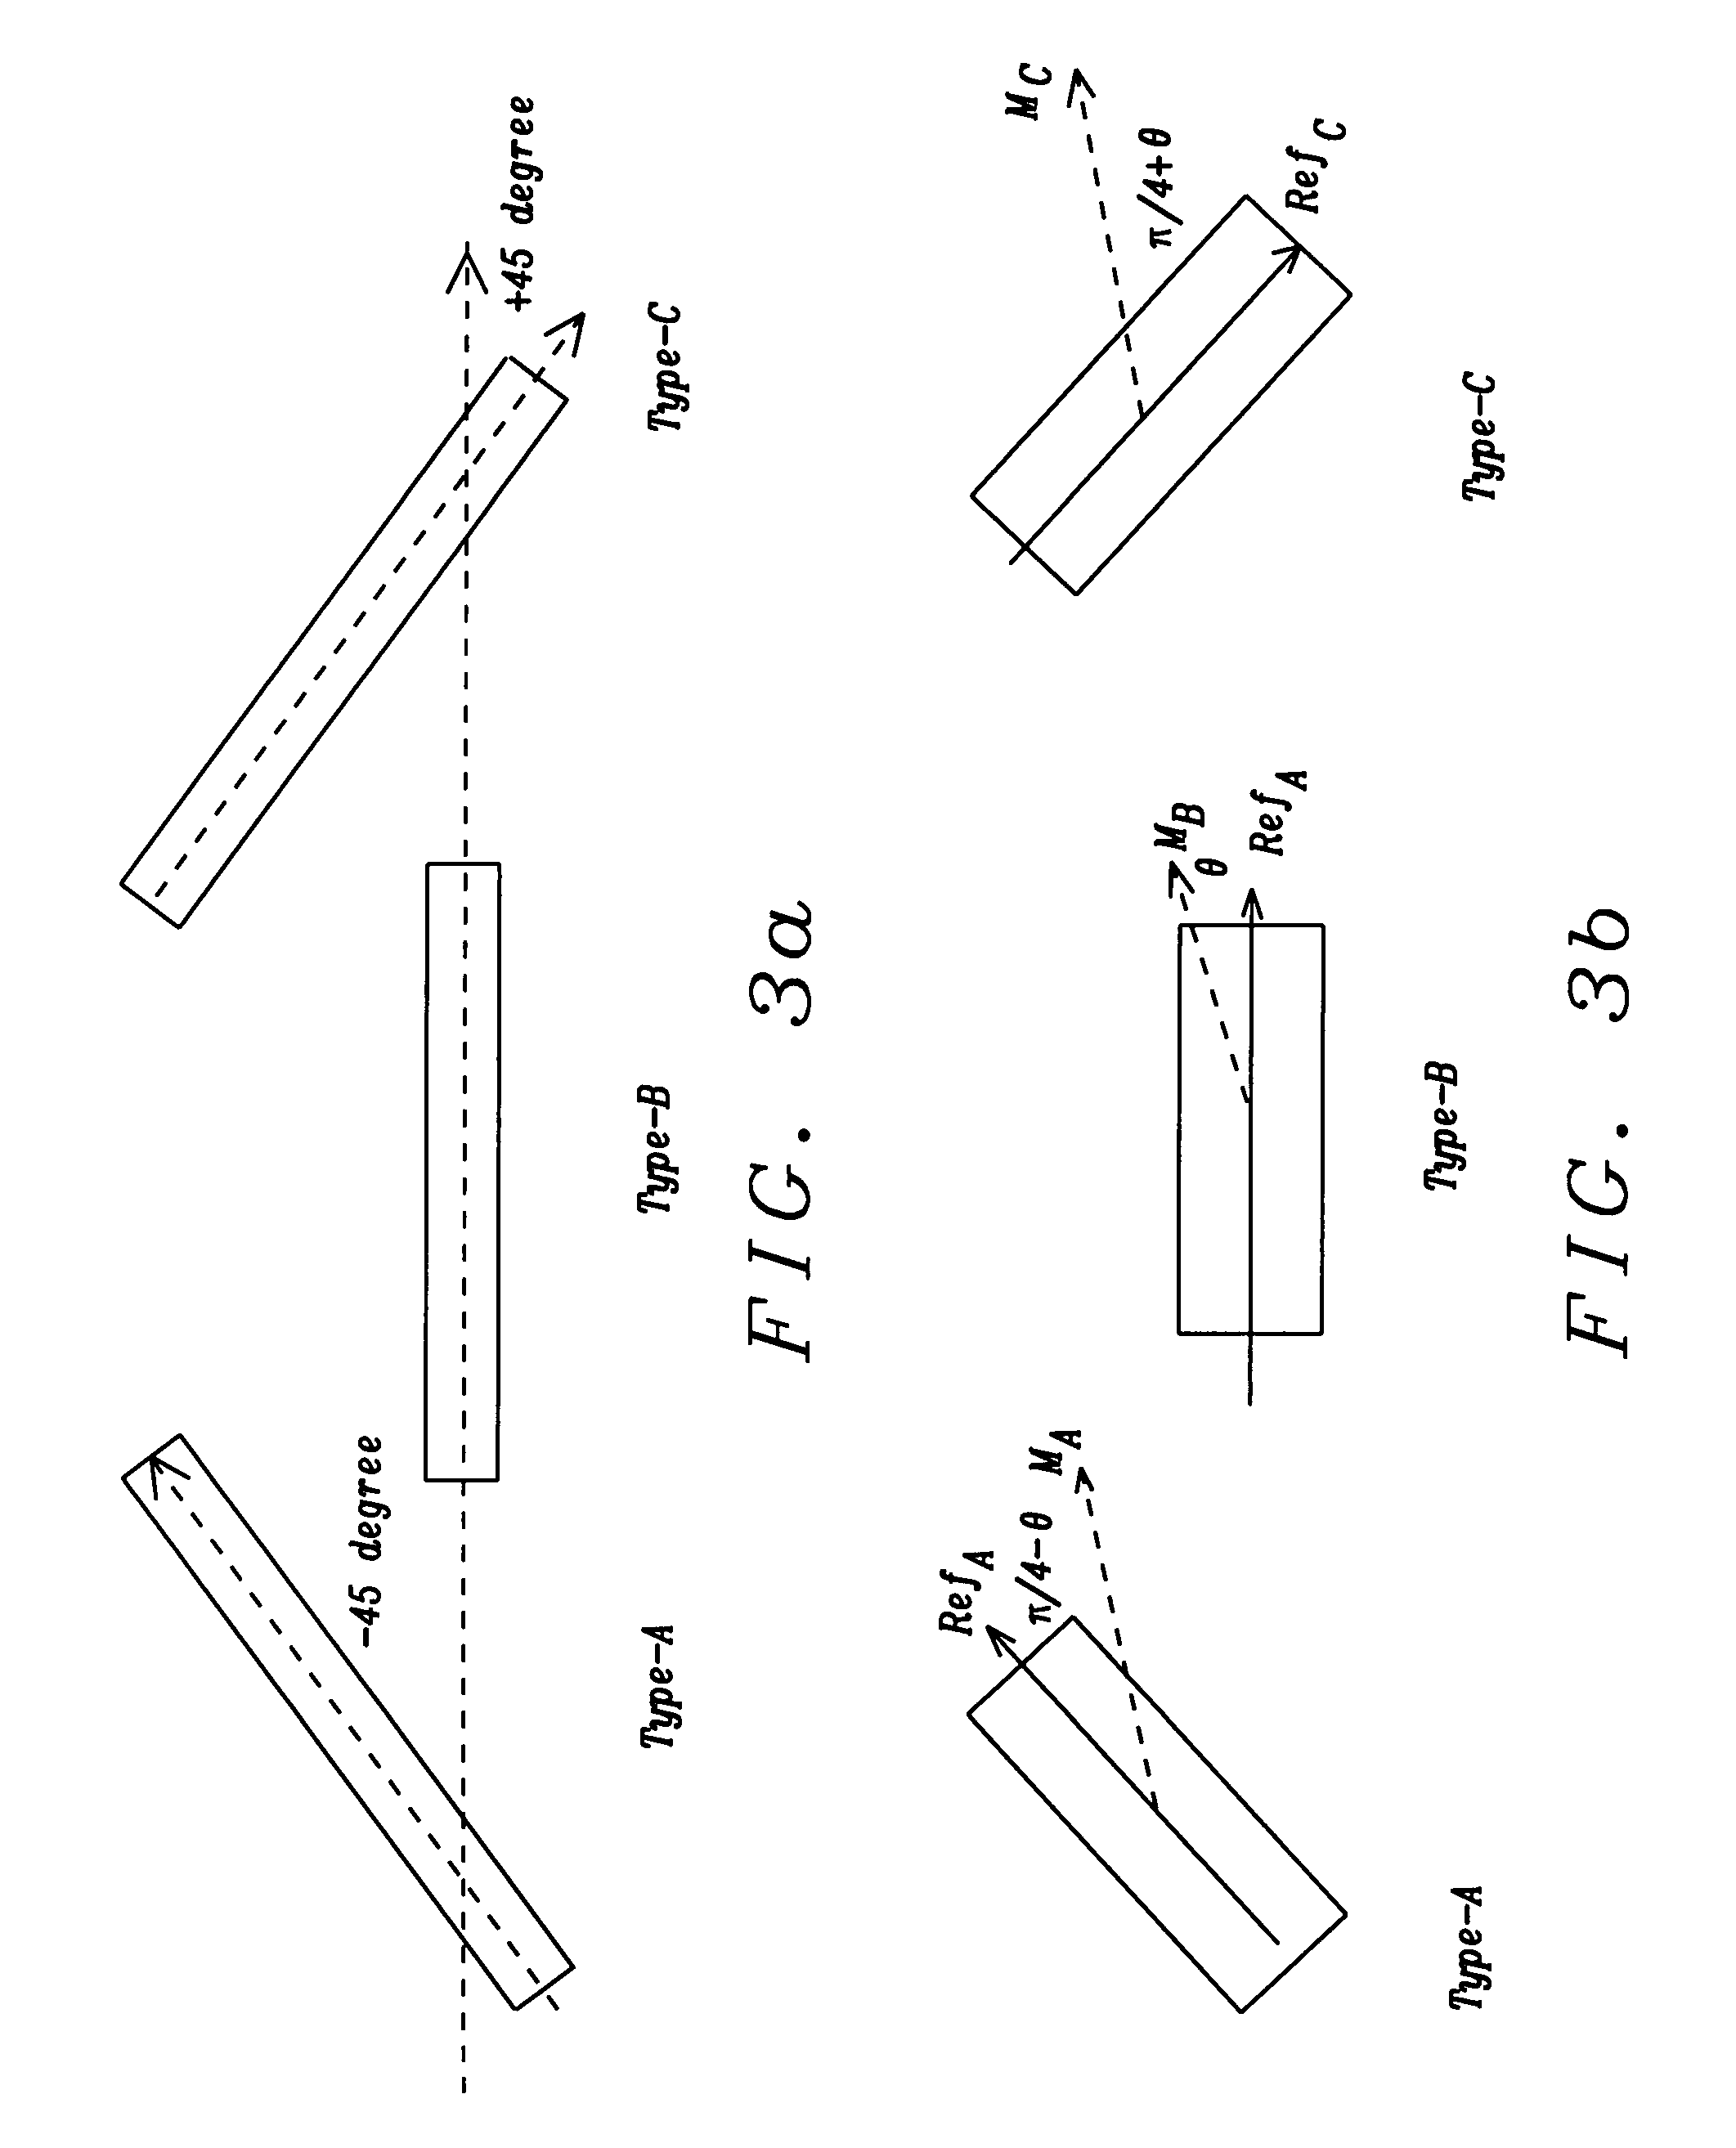 Magnetic field angle sensor with GMR or MTJ elements